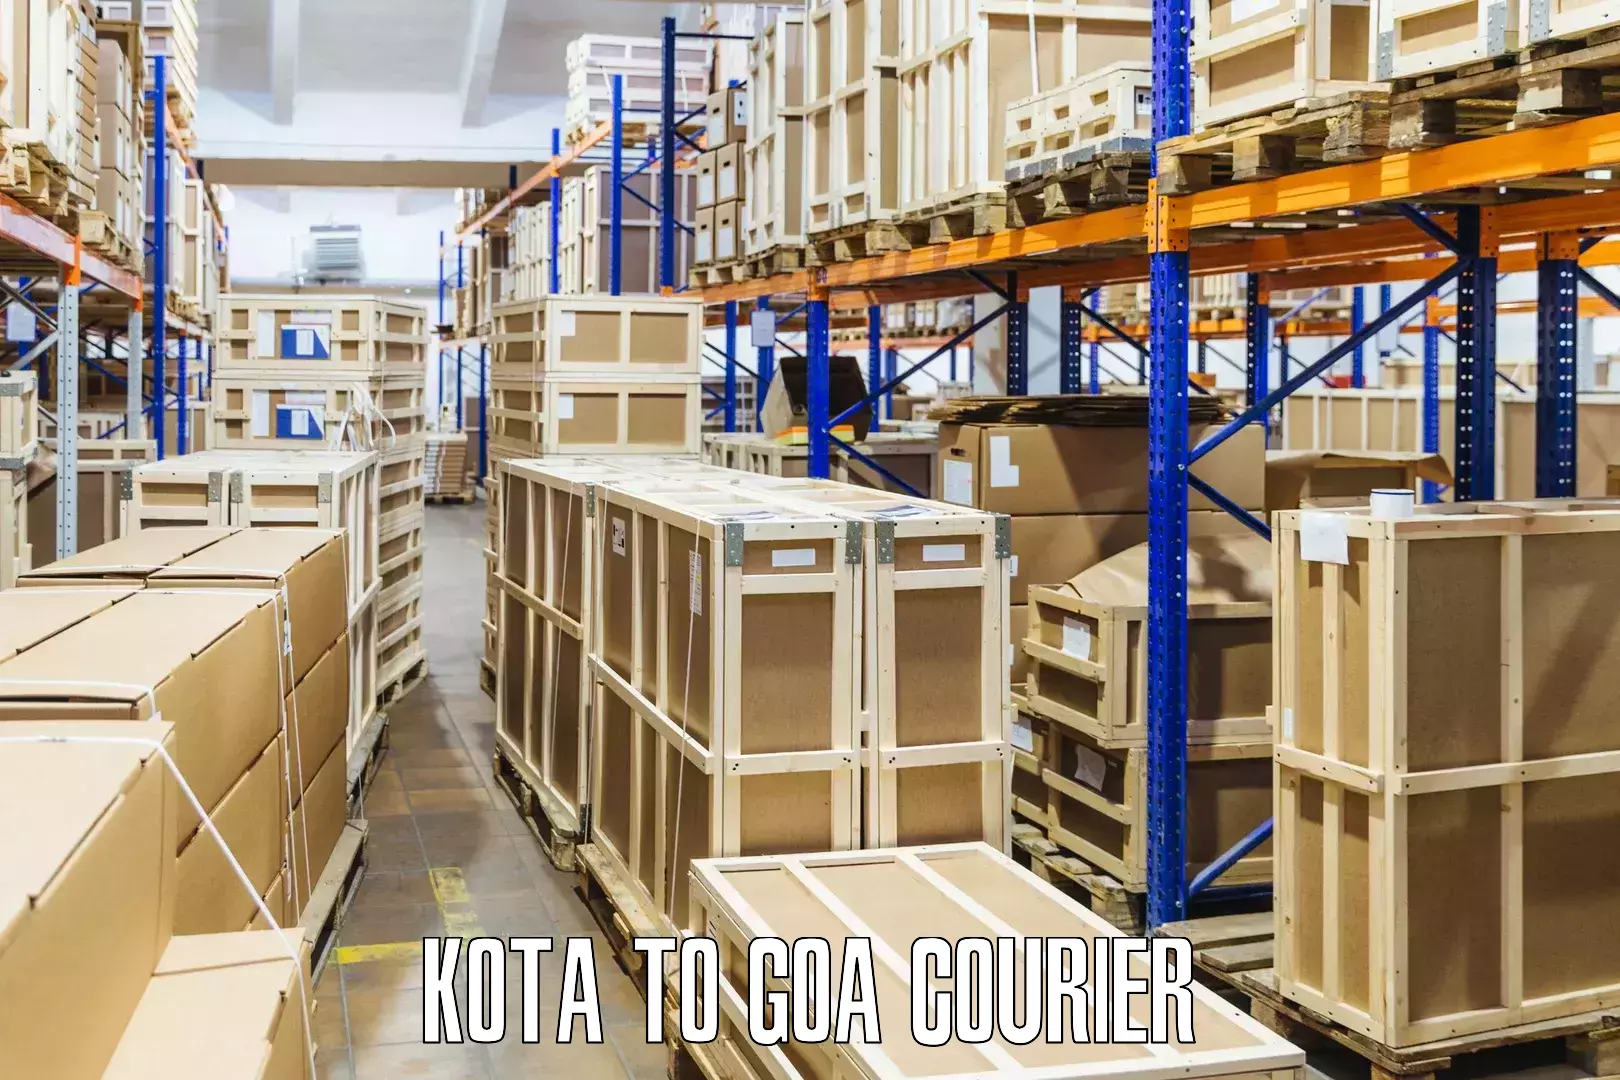 Express package transport in Kota to Goa